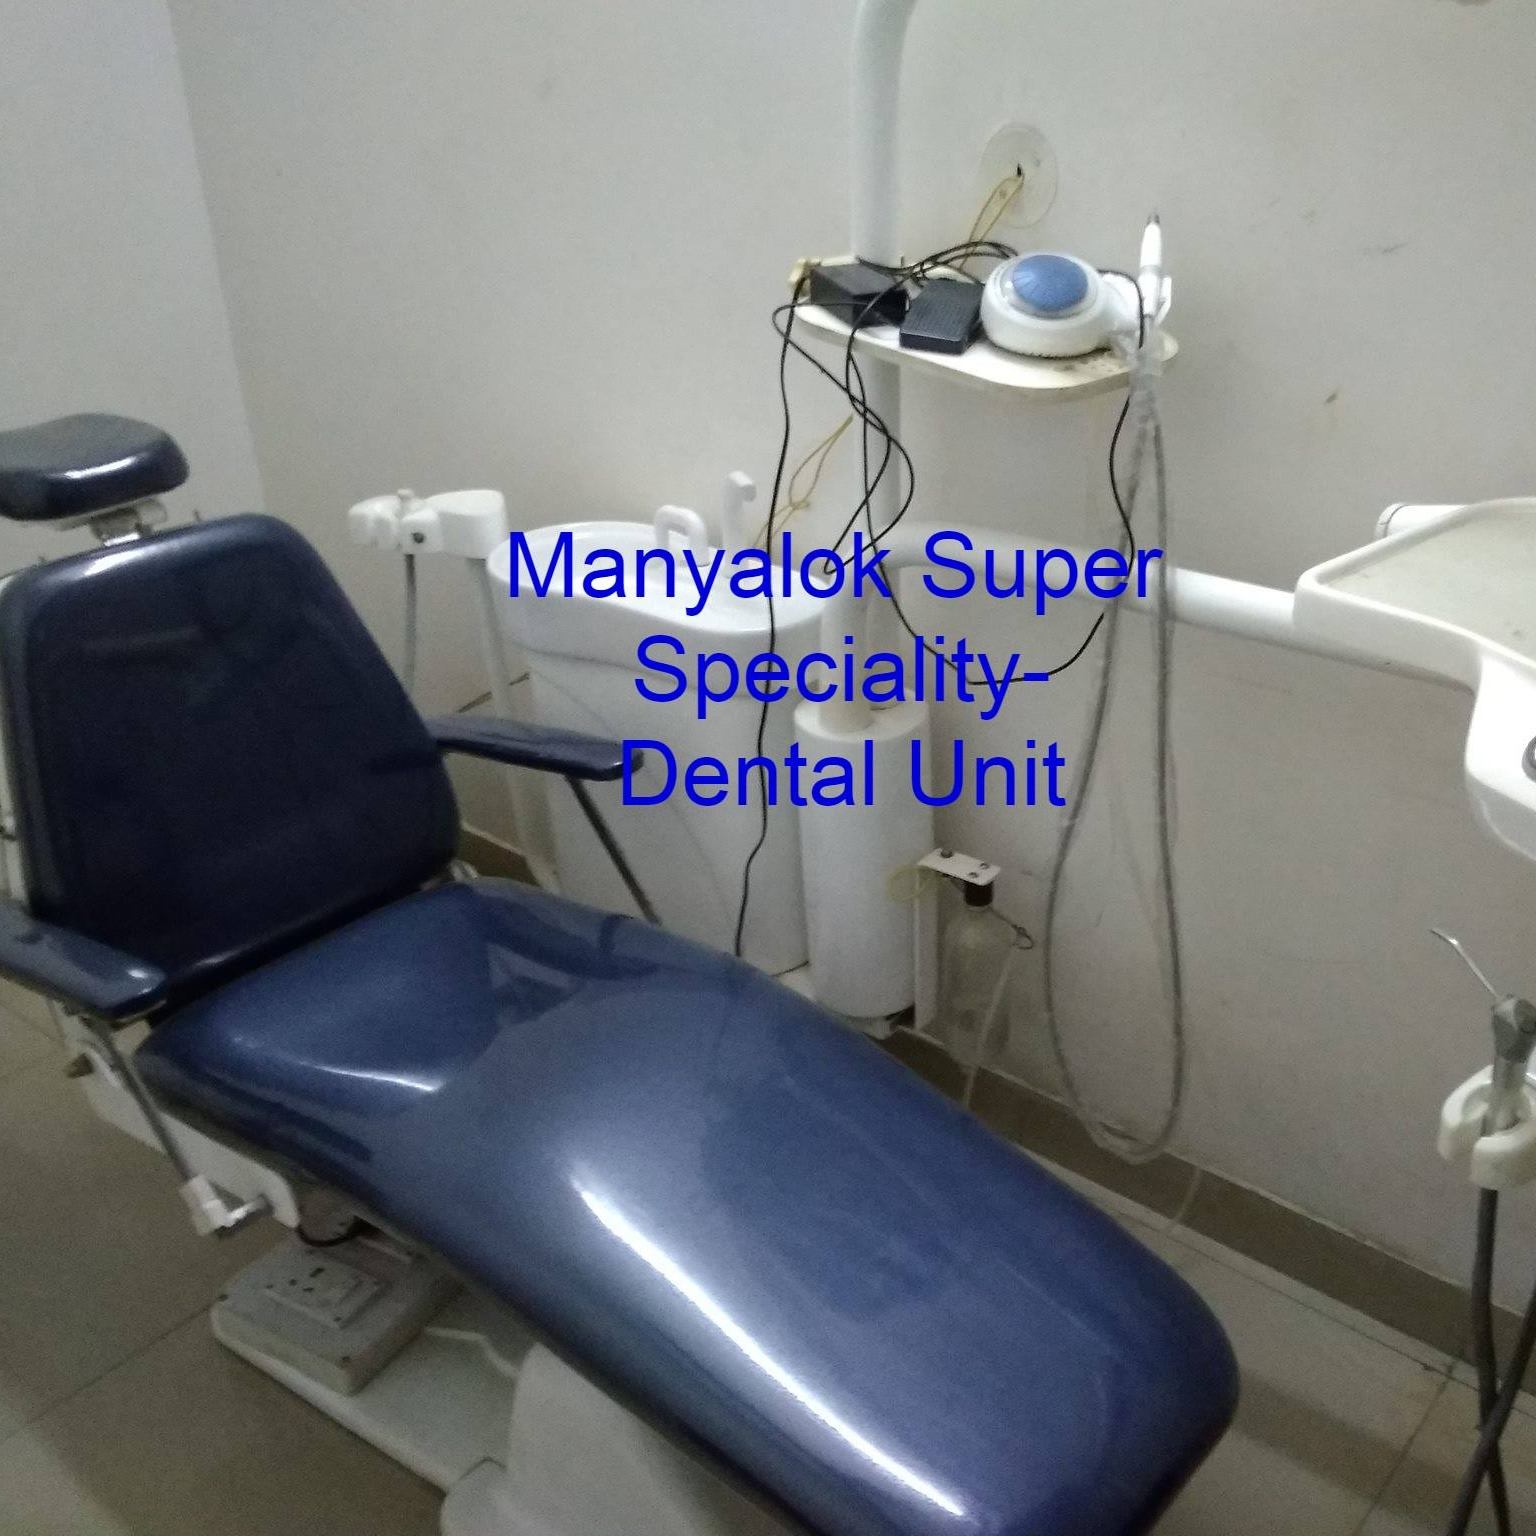 Manyalok Superspeciality - Orthodontics Implant & Pediatric Dentistry|Healthcare|Medical Services